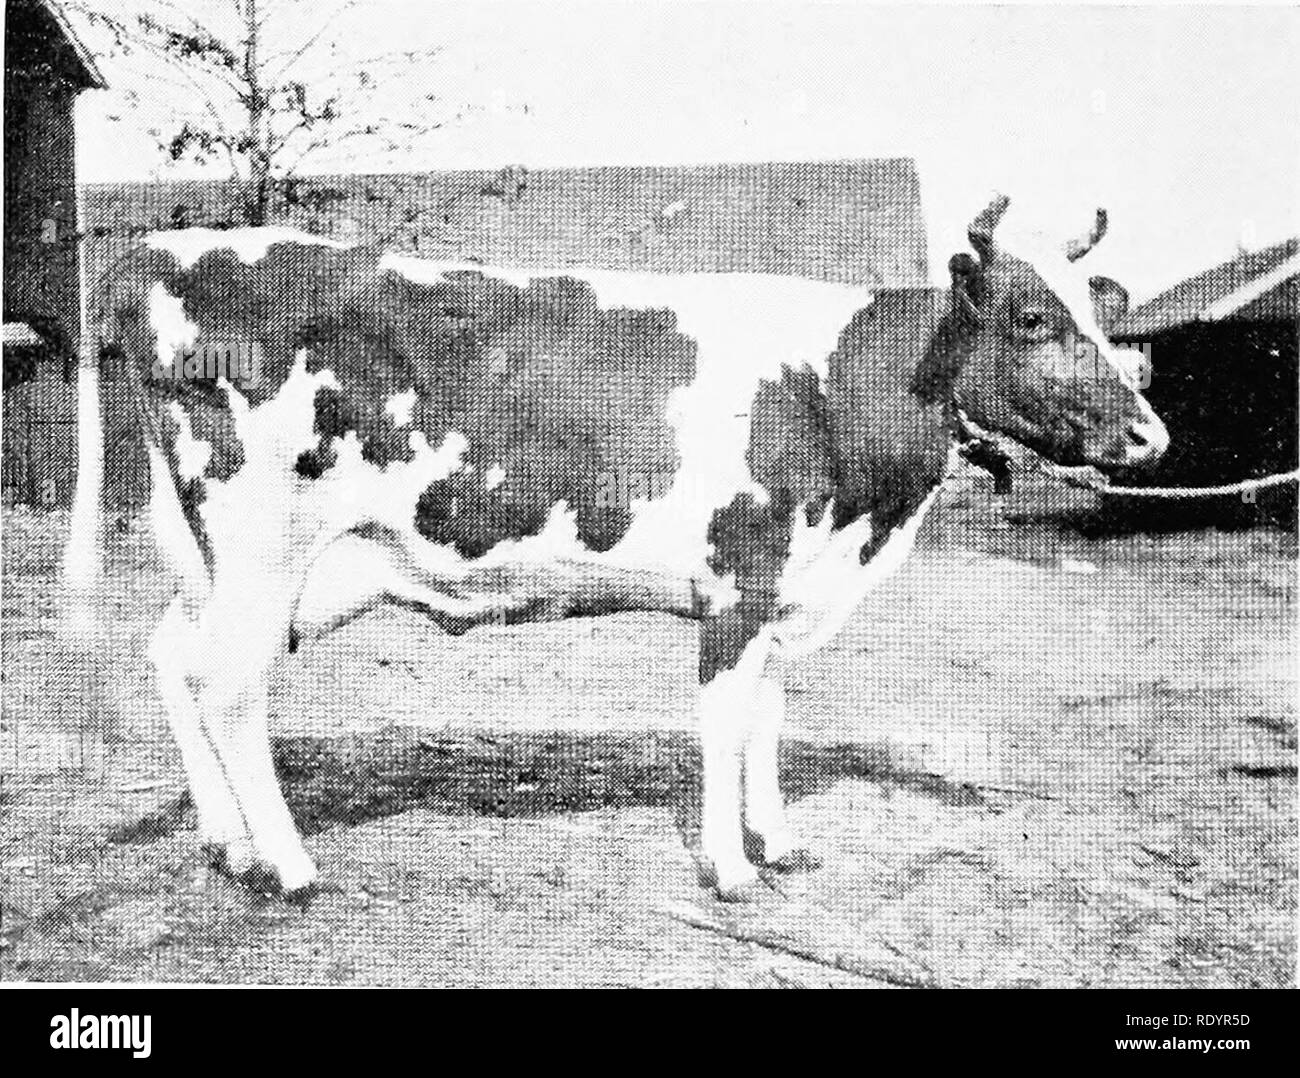 . The Guernsey breed. Guernsey cattle. 354 The Guernsey Breed Imp. Brunette II du Carrefour 31960, A. R.—A 454.23 May Lad 2717,P. S. (R. G. A. S.), A. R. sire of Imp. Bountiful of Anna Dean Farm 46912, A. R. 3098, F 419.70 Imp. Elliott's Fatcination III 47150, A. R. 3743, E 466.13 Jedetta 11966, A. R. 227. Imp. Annatto 3887 Sire of Jcdctta, 451.07 lbs. fat. Ringleader 590, P. S 1st prize, R. G. A. S. 1891. 1st prize, R. G. A. S. 1892. ^Vrangue's Favorite IV 1923, P. S Derita 7668 -Ampere 2990 .Abilene 5651 Advantage 463, P. S. 1st prize, R. G. A. S., 1888. Unity 1576, P. .S. Ist prize, R. G. A Stock Photo